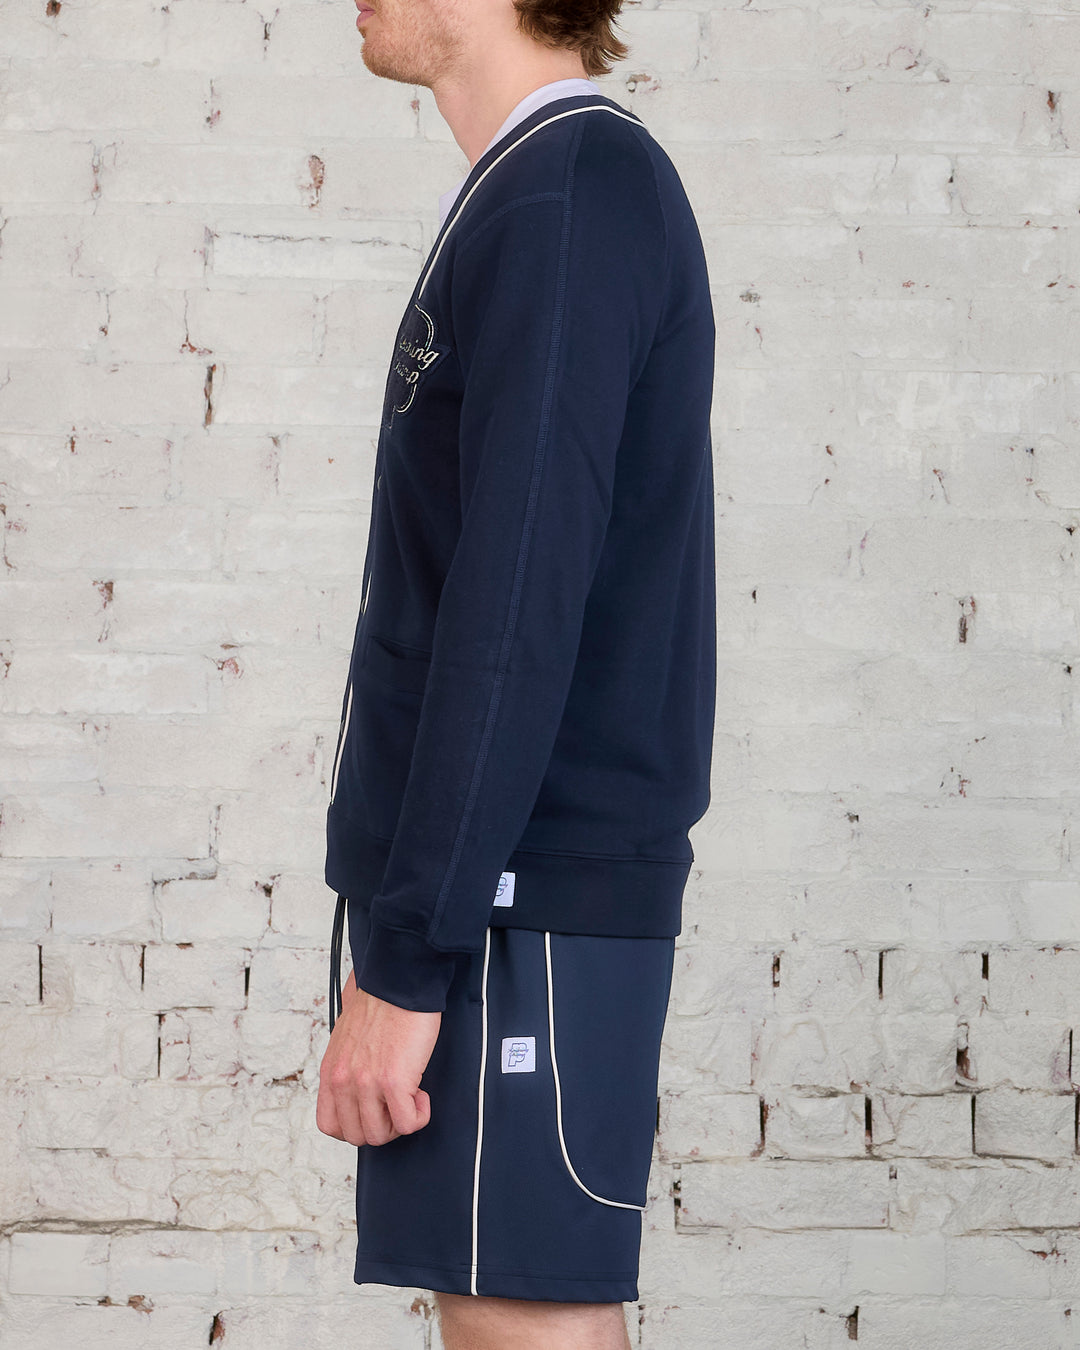 Reigning Champ x Prince Lightweight Terry Cardigan Navy